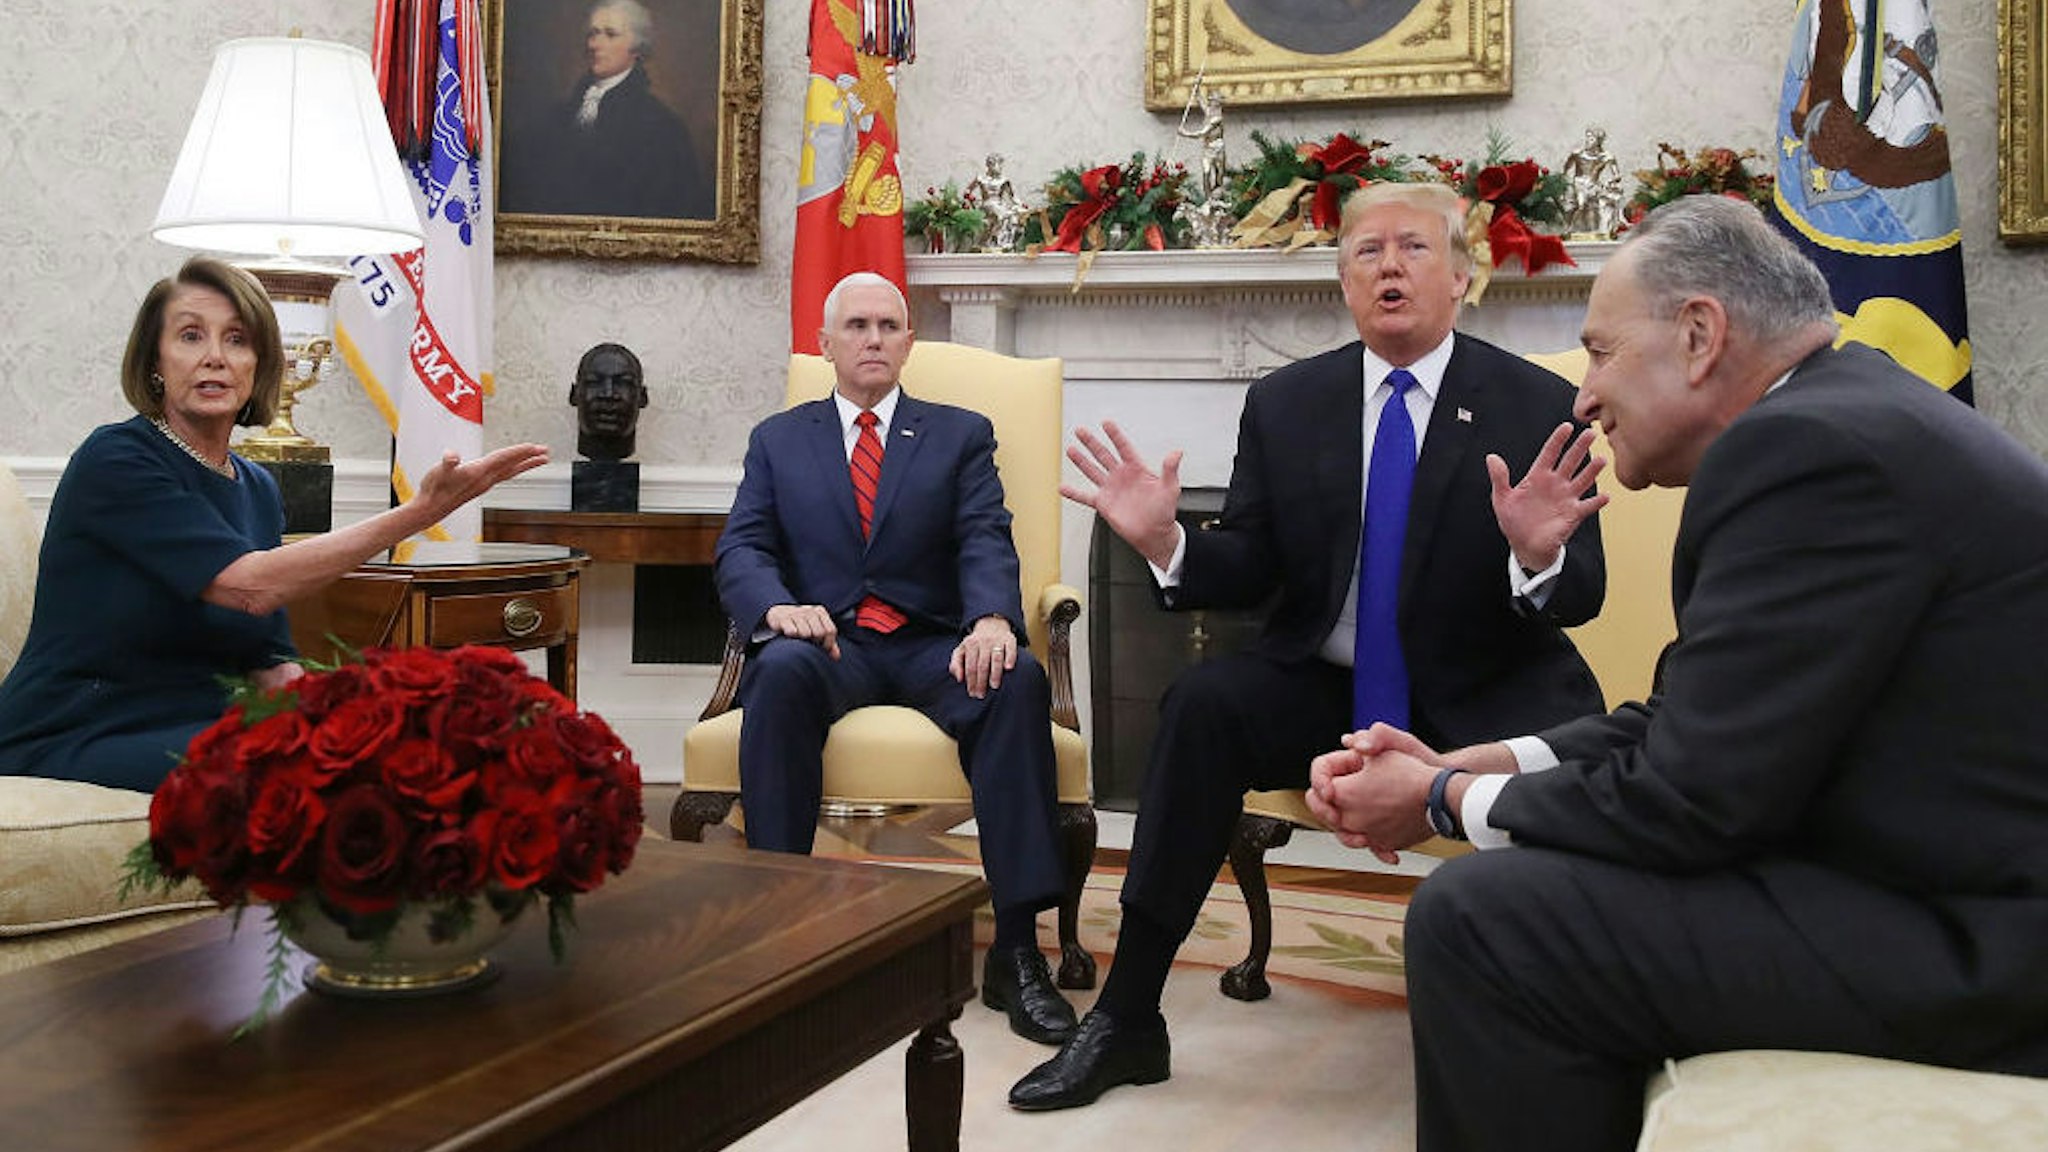 President Trump Meets With Nancy Pelosi And Chuck Schumer At White House on December 7, 2018 in Washington, DC.